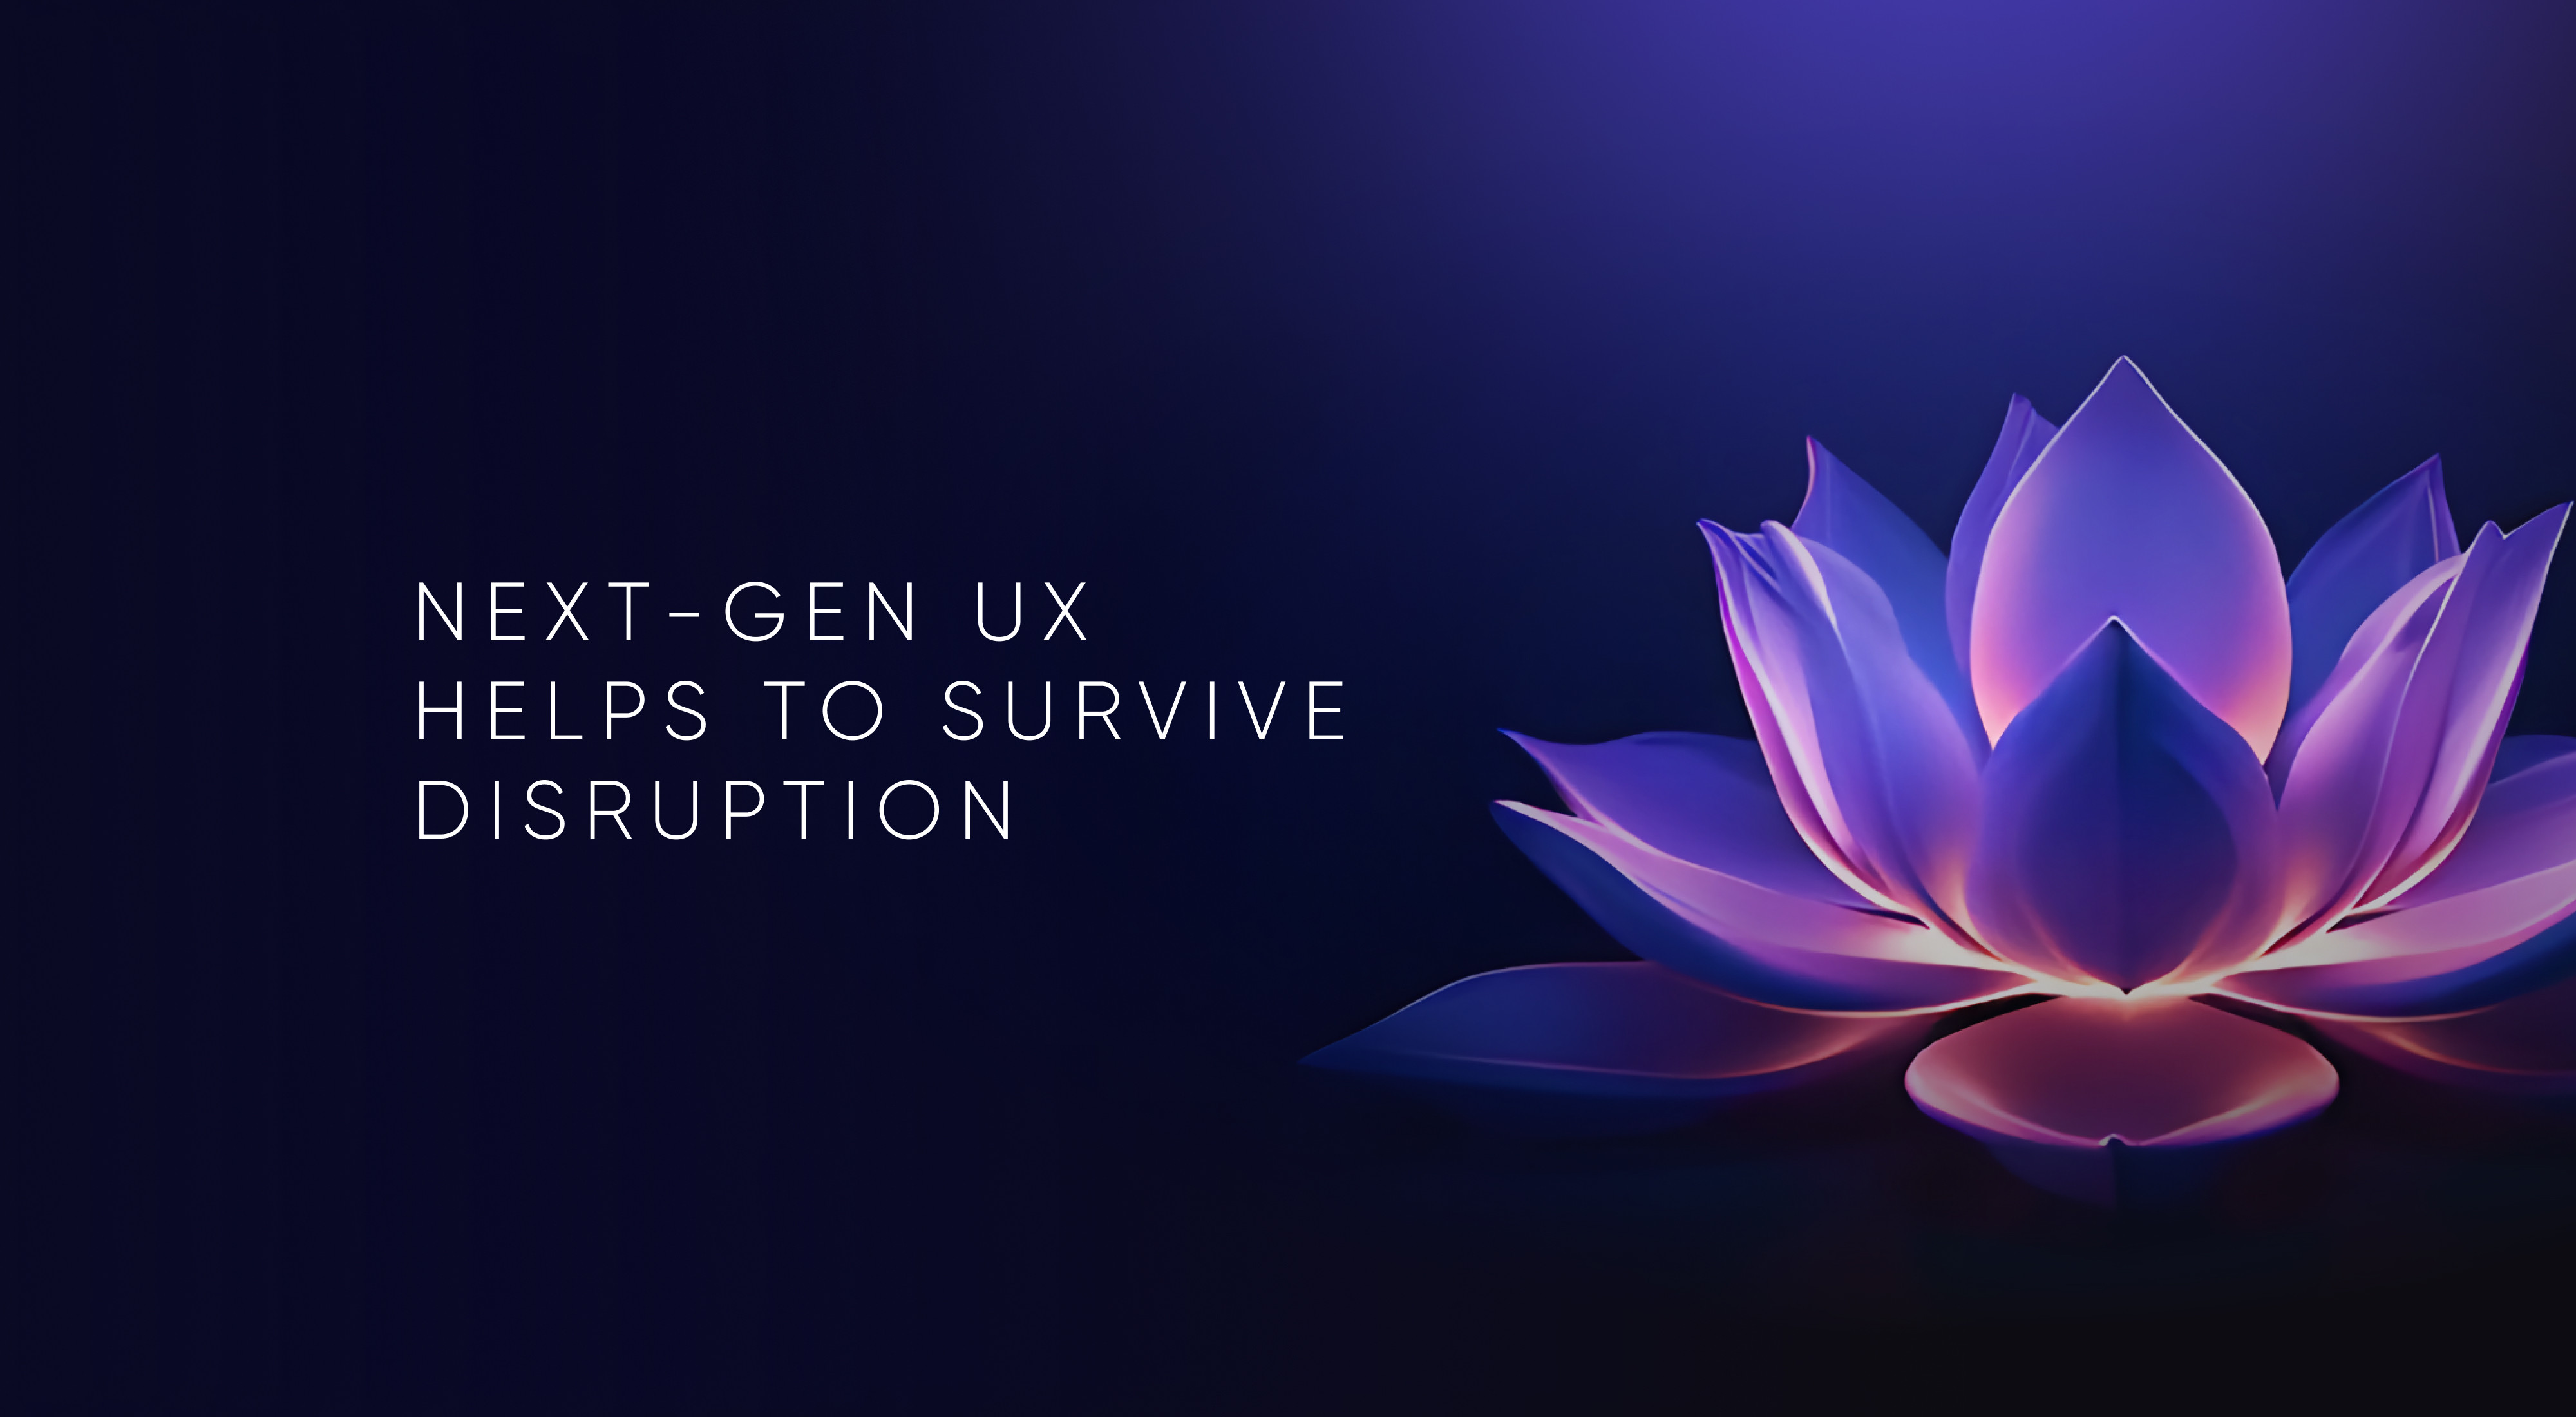 Banking Innovation: Next-Gen UX to Survive Industry Disruption